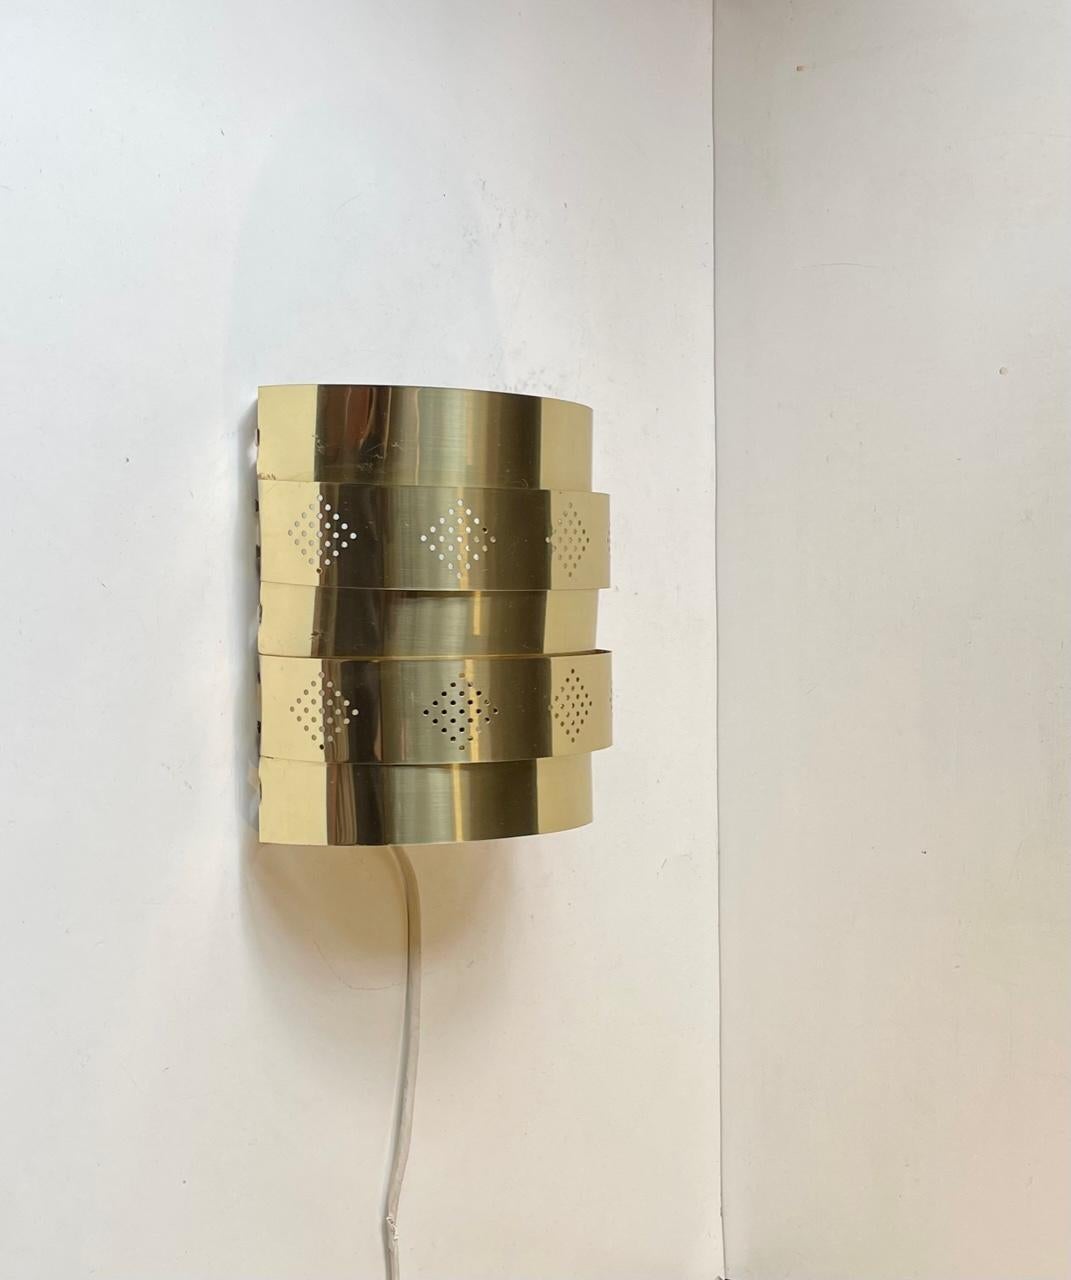 Sculptural Wall lamp designed by Werner Schou and manufactured by Coronell Elektro in Denmark during the early 1970s. Its front is made from Brass, partially perforated in Diamond shapes. This style of lighting is reminiscent of Hans Agne Jakobsson